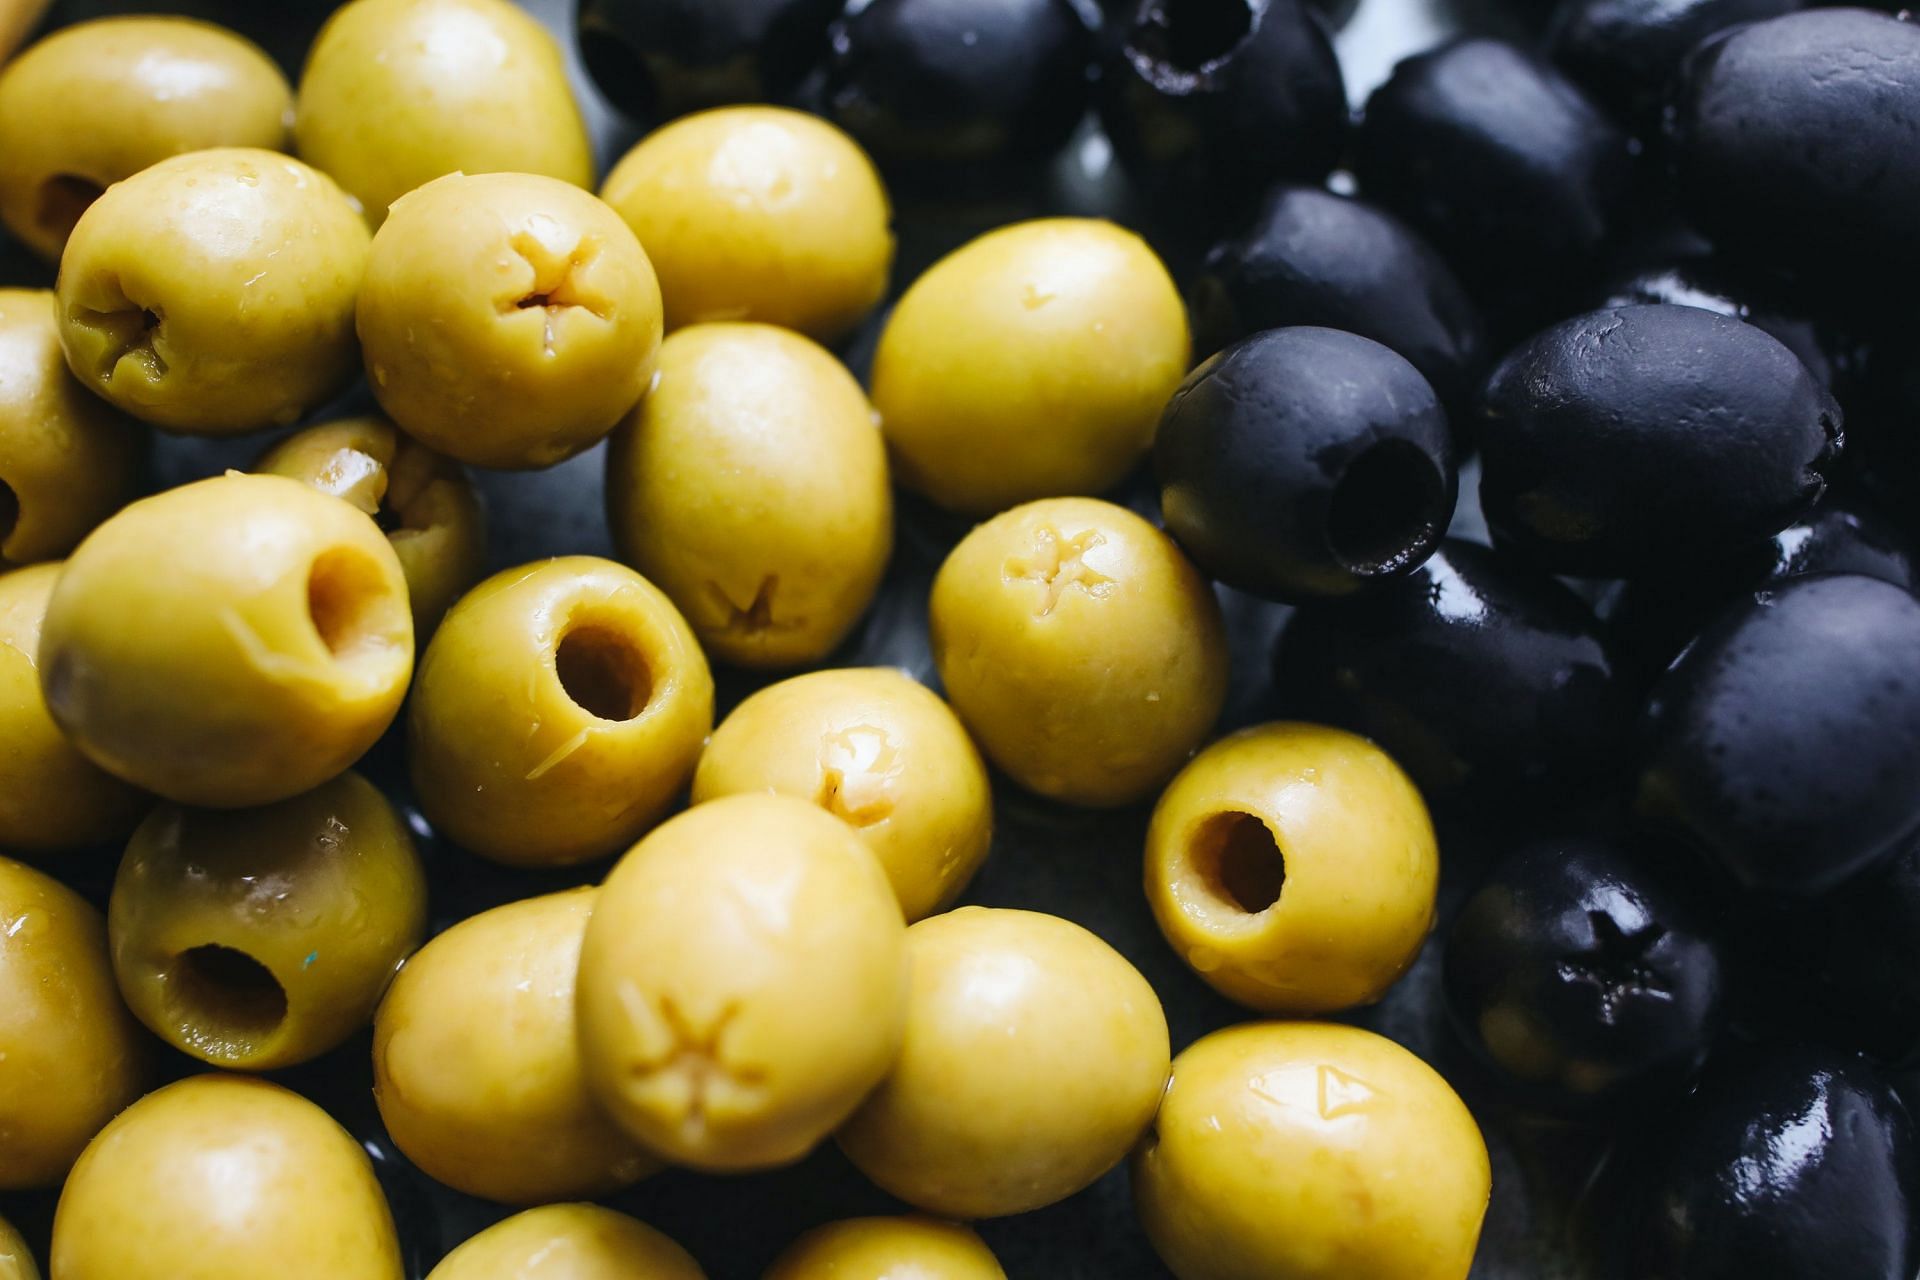 10 weird fruits that are actually vegetables (Image sourced via Pexels / Photo by Polina)